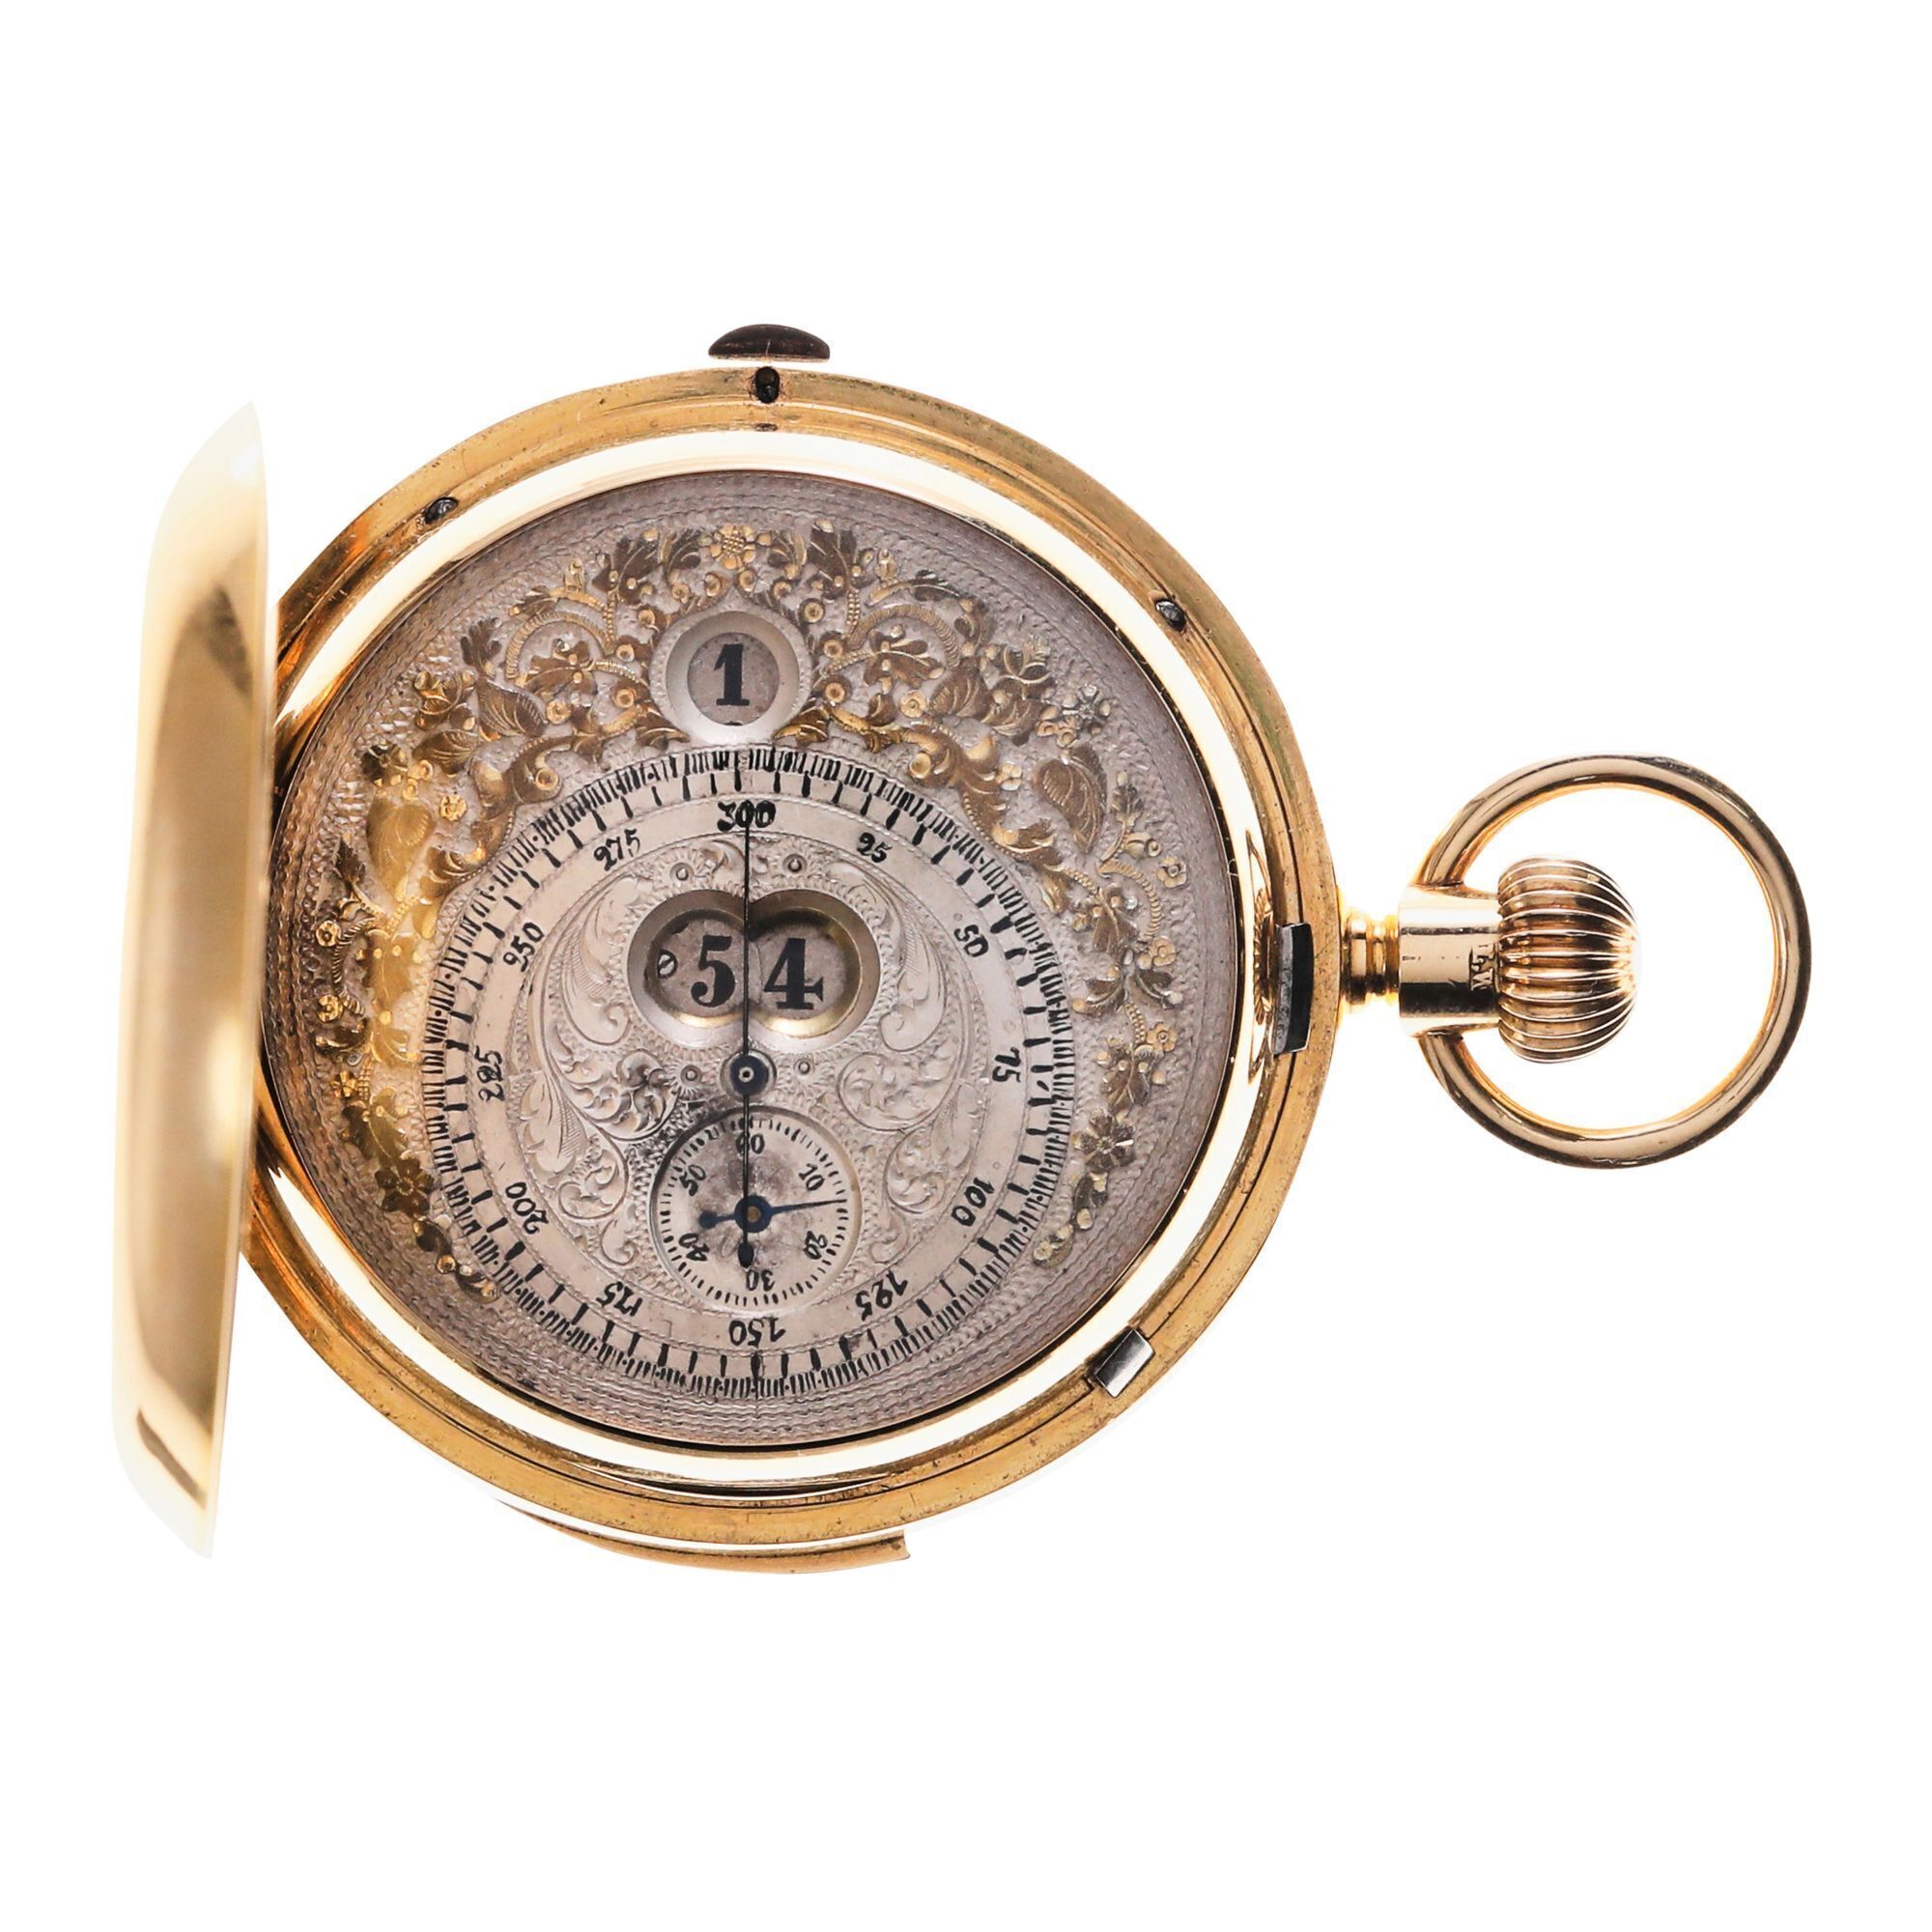 Rare Minute Repeater Chronograph Digital Jumping Hour & Minutes 18K Gold Pocket Watch